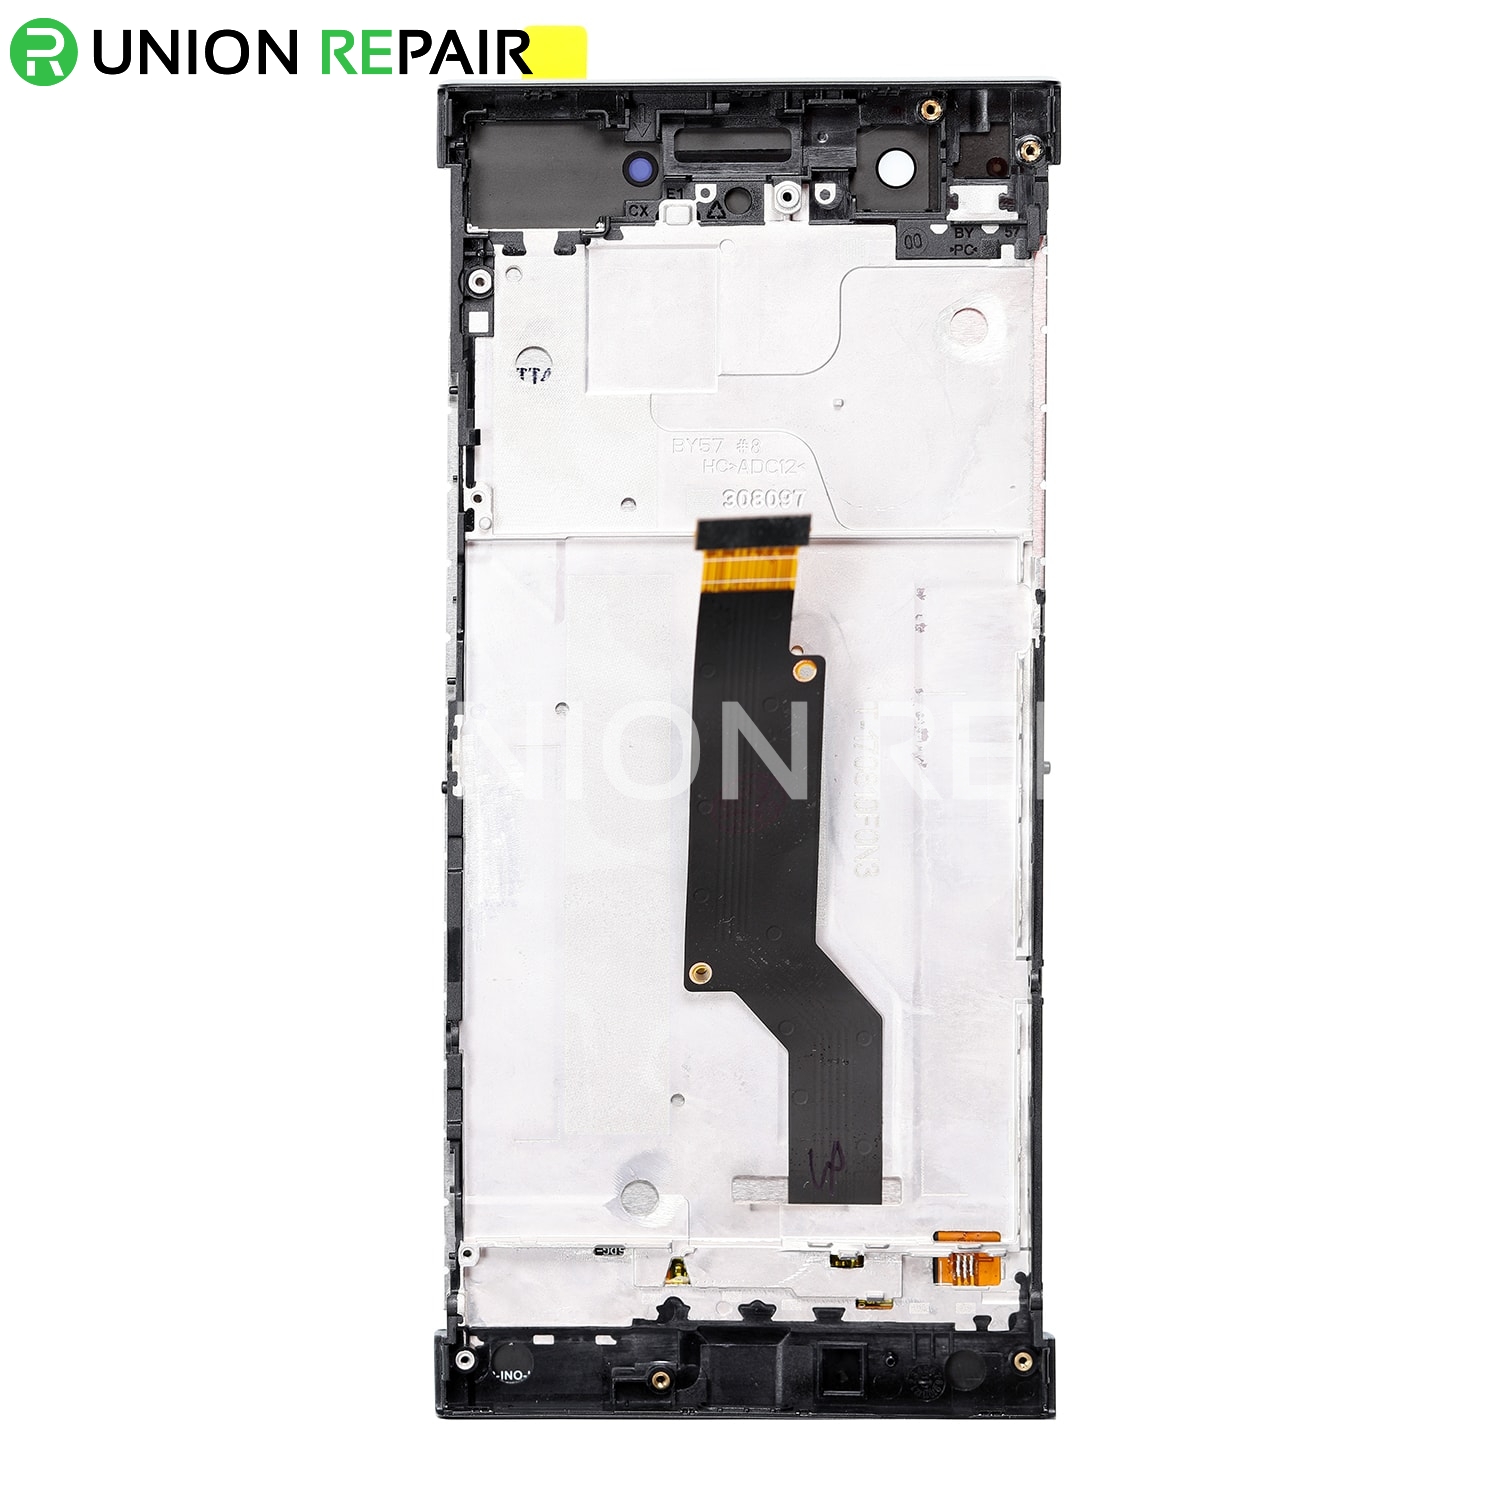 Replacement for Sony Xperia XA1 LCD Screen Digitizer Assembly with Frame - Black